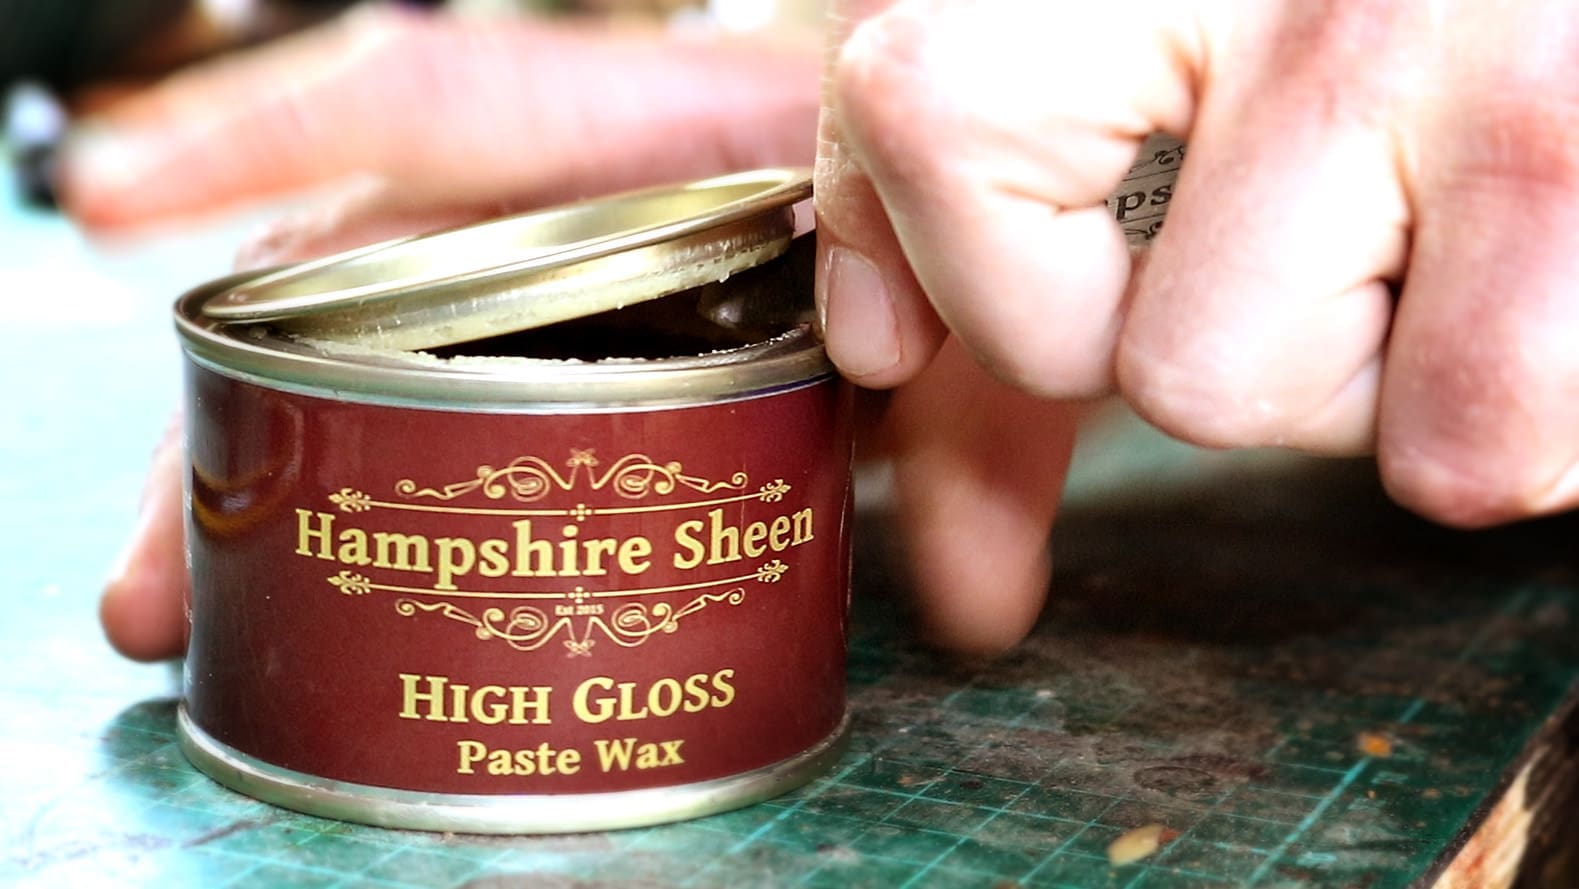 How Are Hampshire Sheen Products Devised?